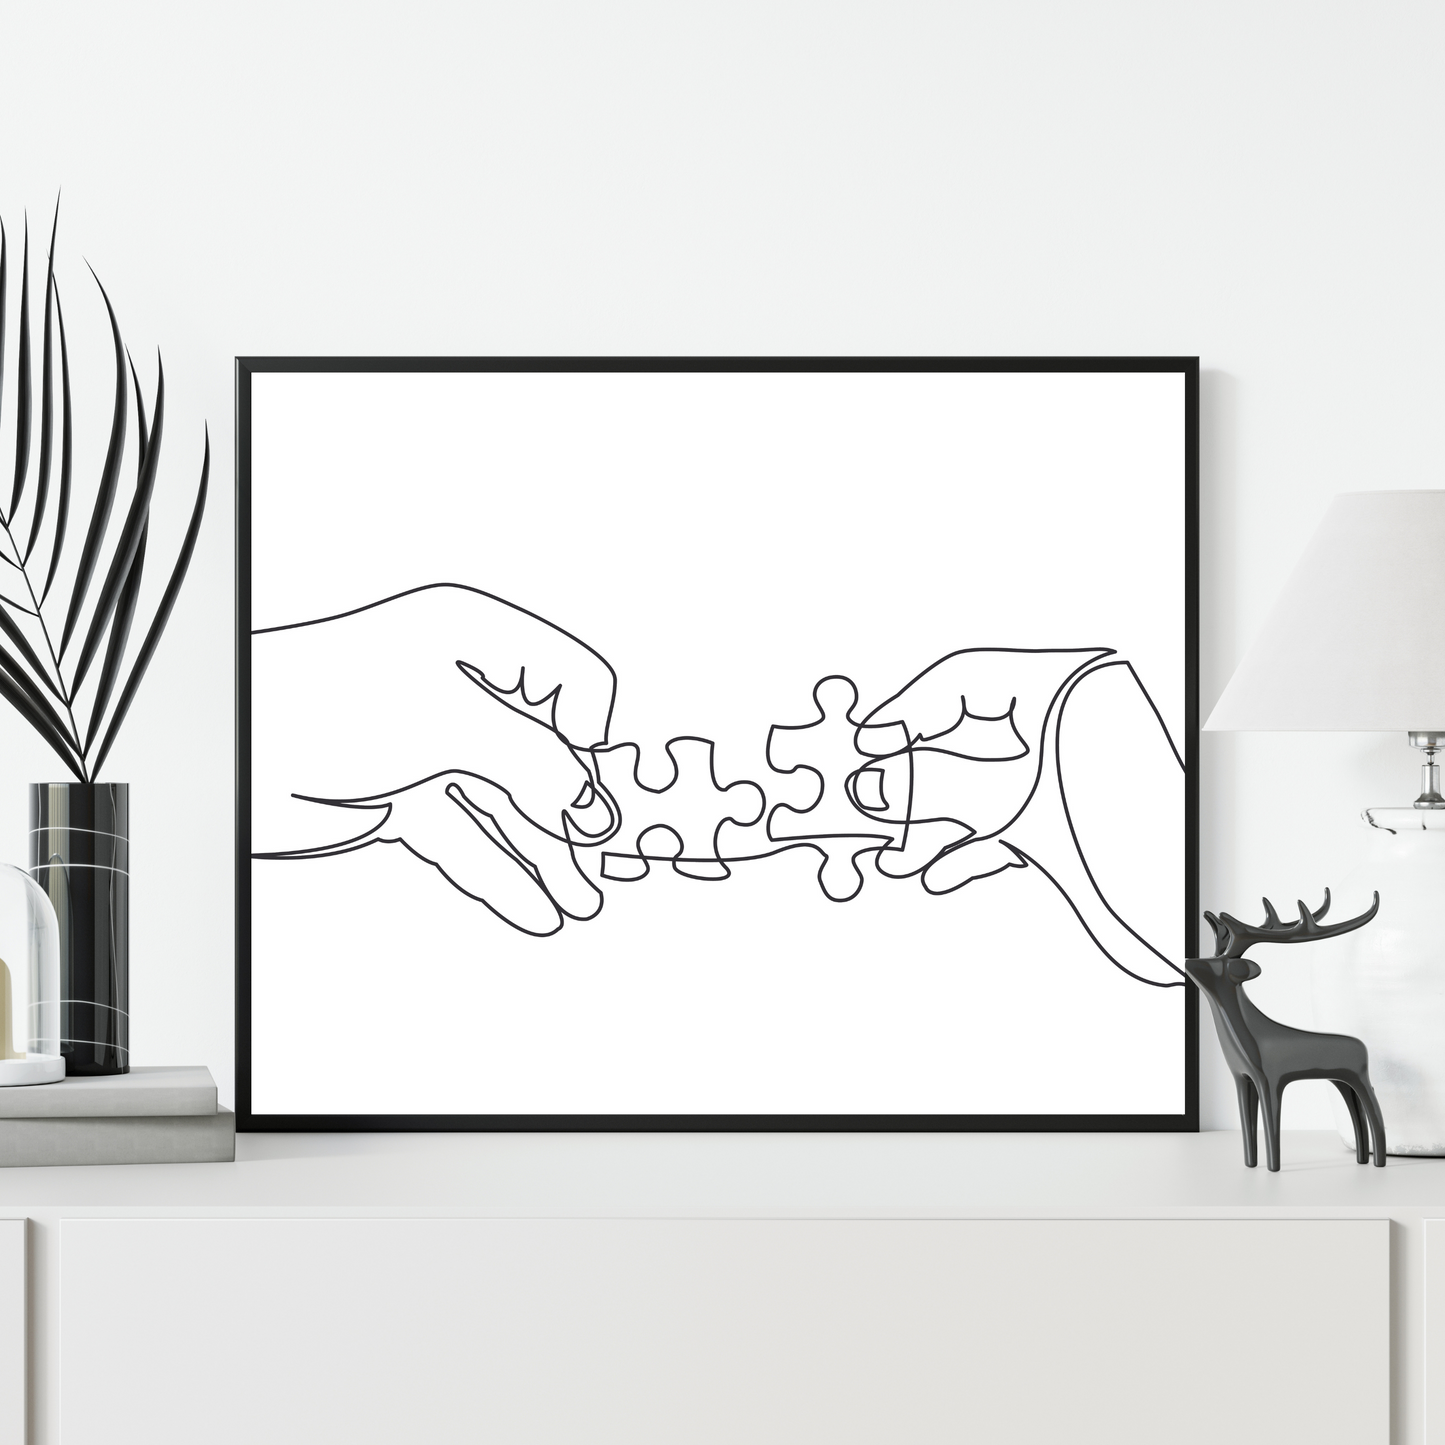 Continuous line drawing of hands solving jigsaw puzzle